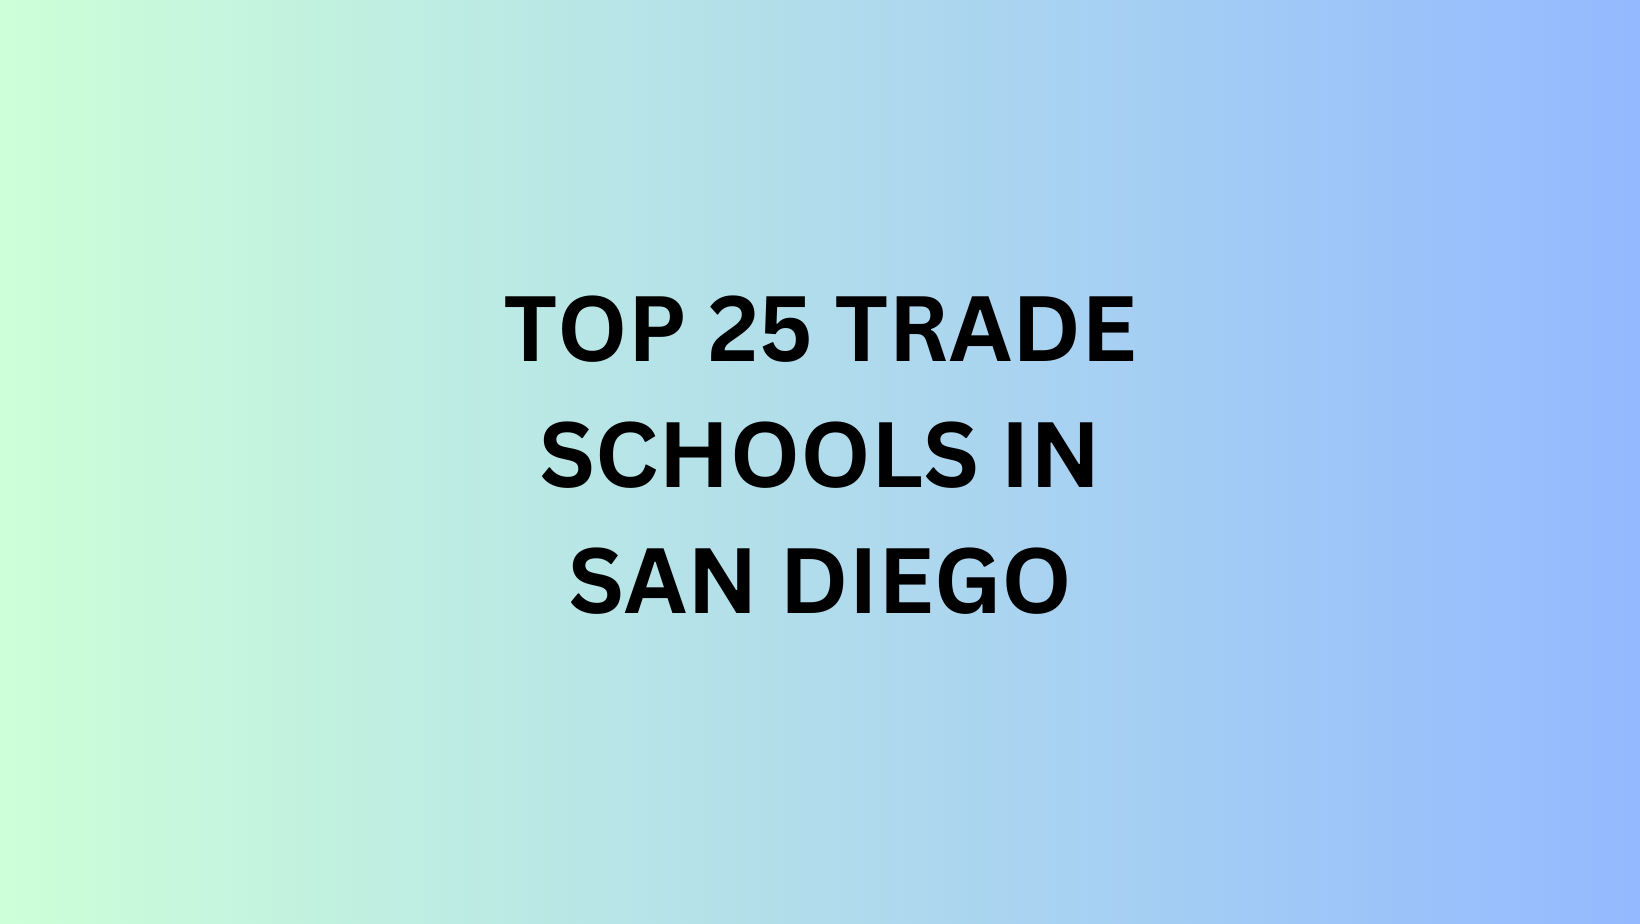 TOP 25 LIST OF THE BEST TRADE SCHOOLS IN SAN DIEGO